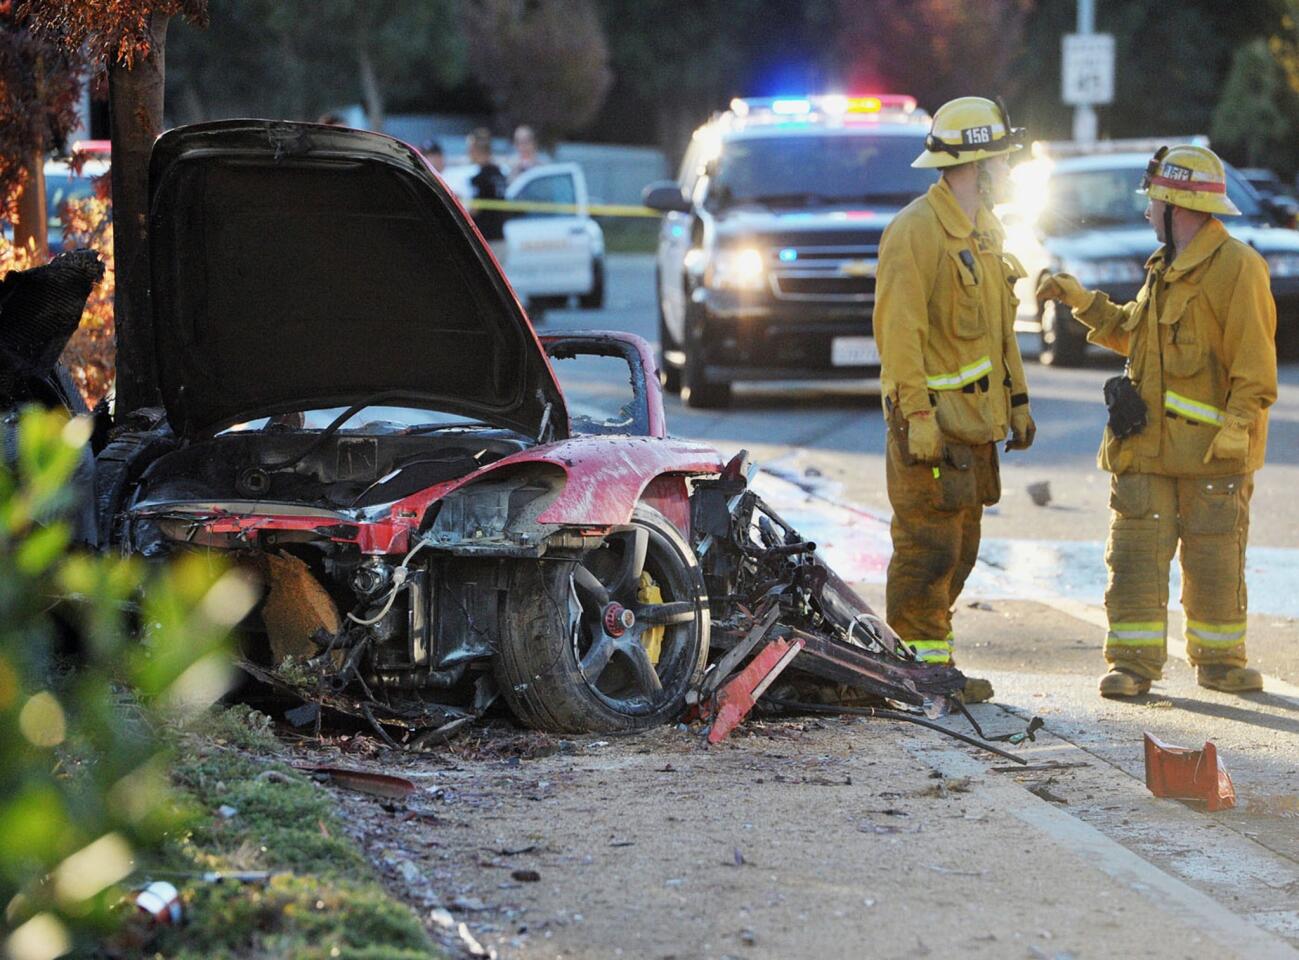 Firefighters and sheriff's deputies work near the crash scene in the 28300 block of Rye Canyon Loop on Nov. 30.